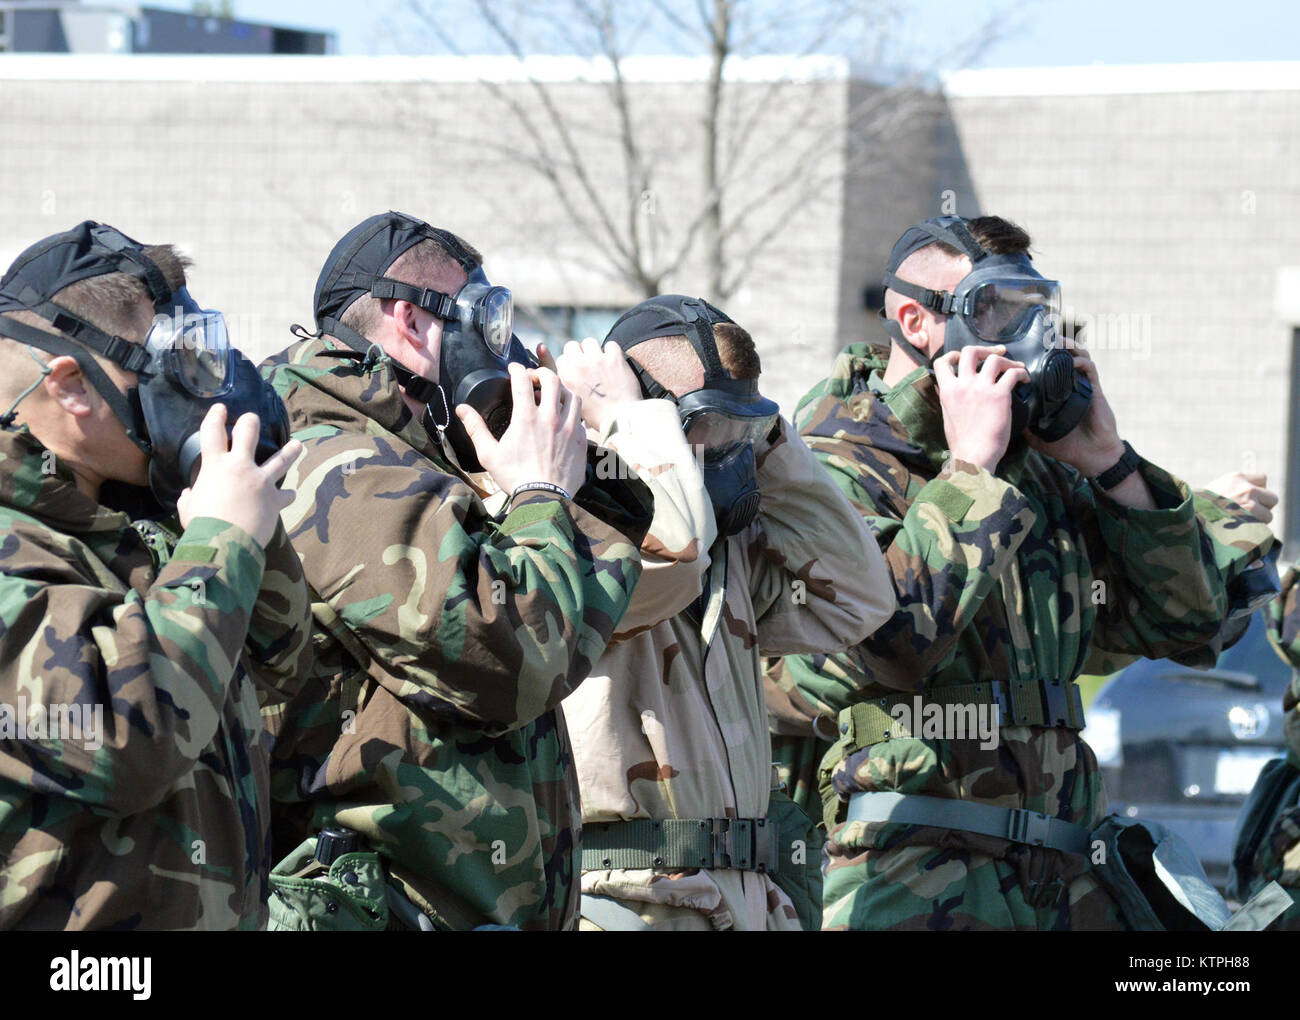 Airmen don their masks during the hands-on chemical, biological, radiological and nuclear training at Stratton Air National Guard Base, New York, on April 18, 2015. The training was part of the 109th Airlift Wing's first ancillary training rodeo where more than 200 Airmen were trained on CBRN as well as self-aid and buddy care. (U.S. Air National Guard photo by Tech. Sgt. Catharine Schmidt/Released) Stock Photo